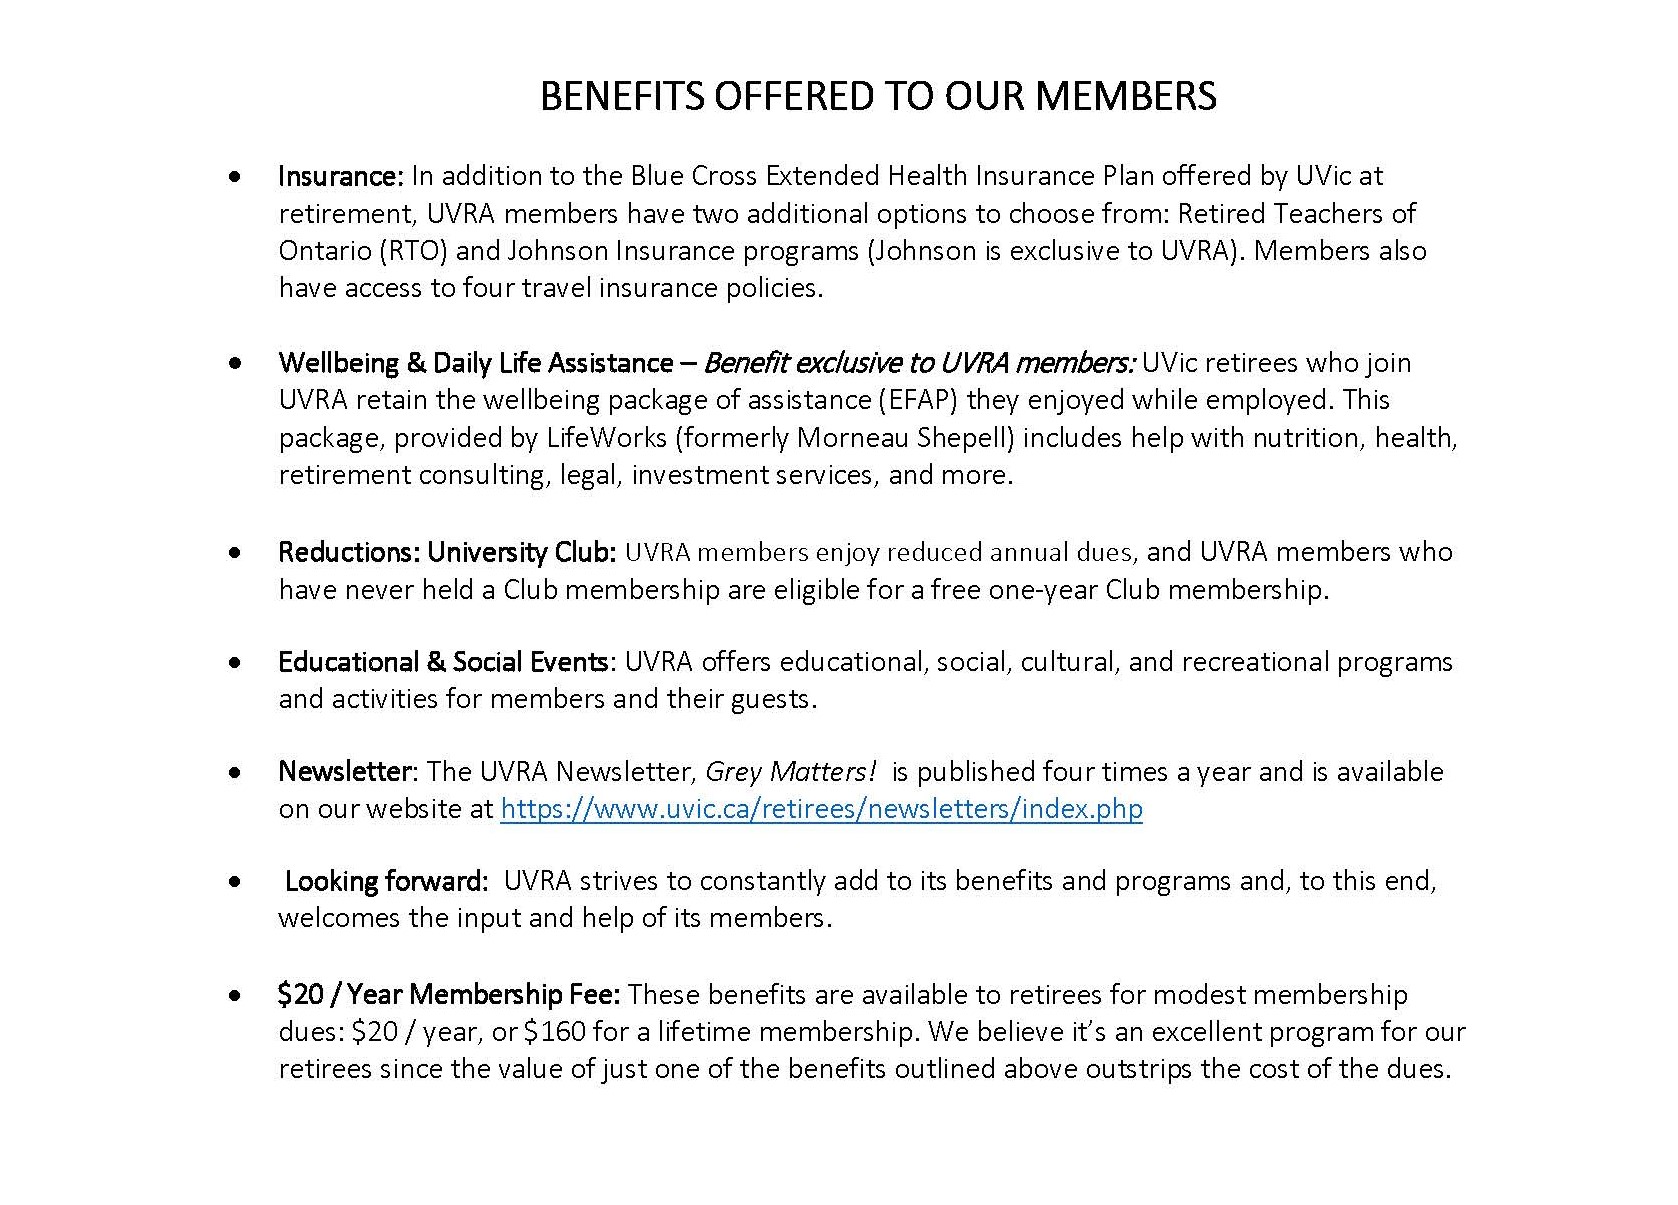 The benefits of being a UVRA member.